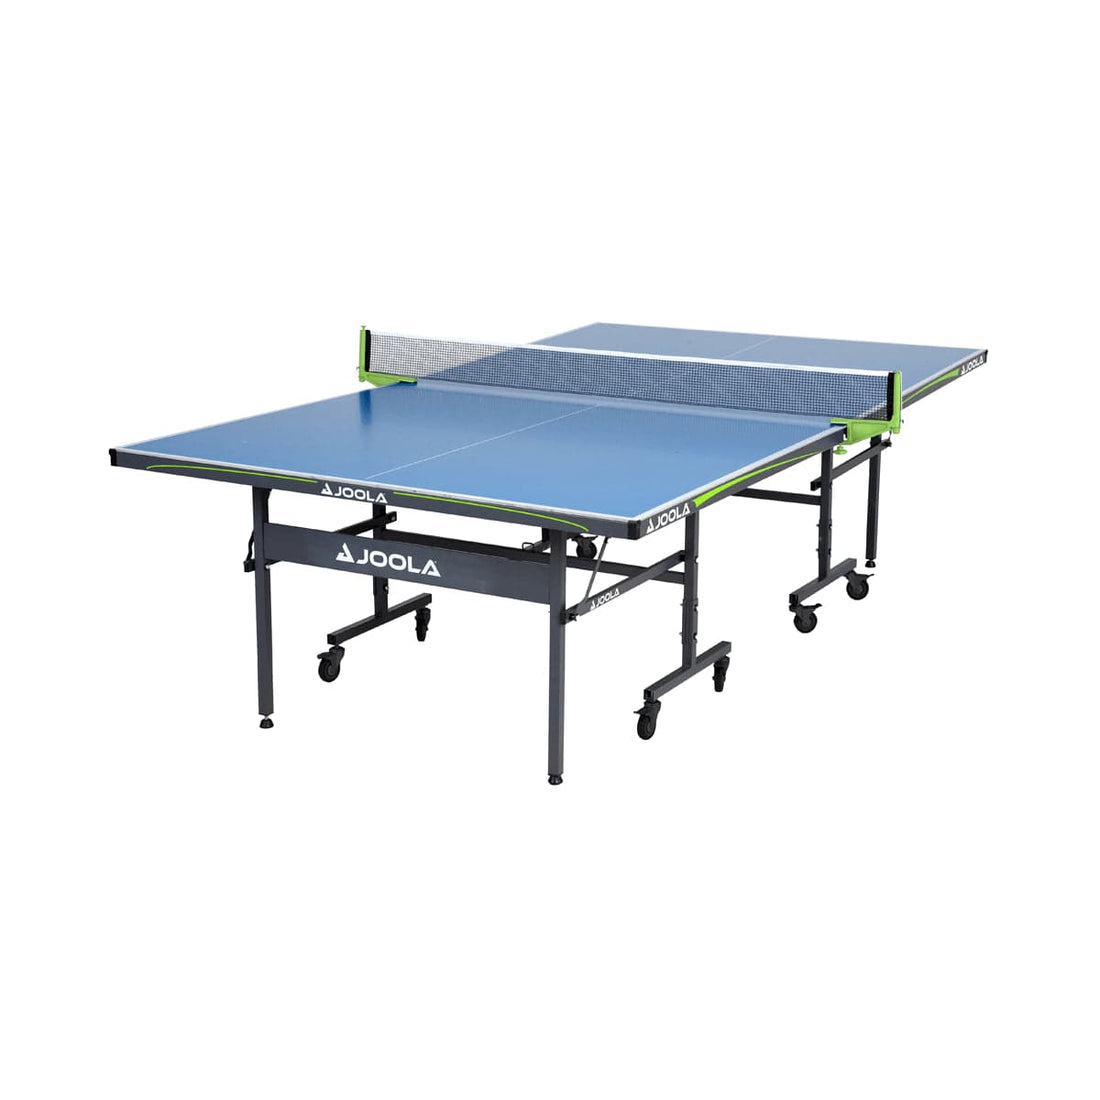 JOOLA OUTDOOR Table Tennis Table - Atomic Game Store